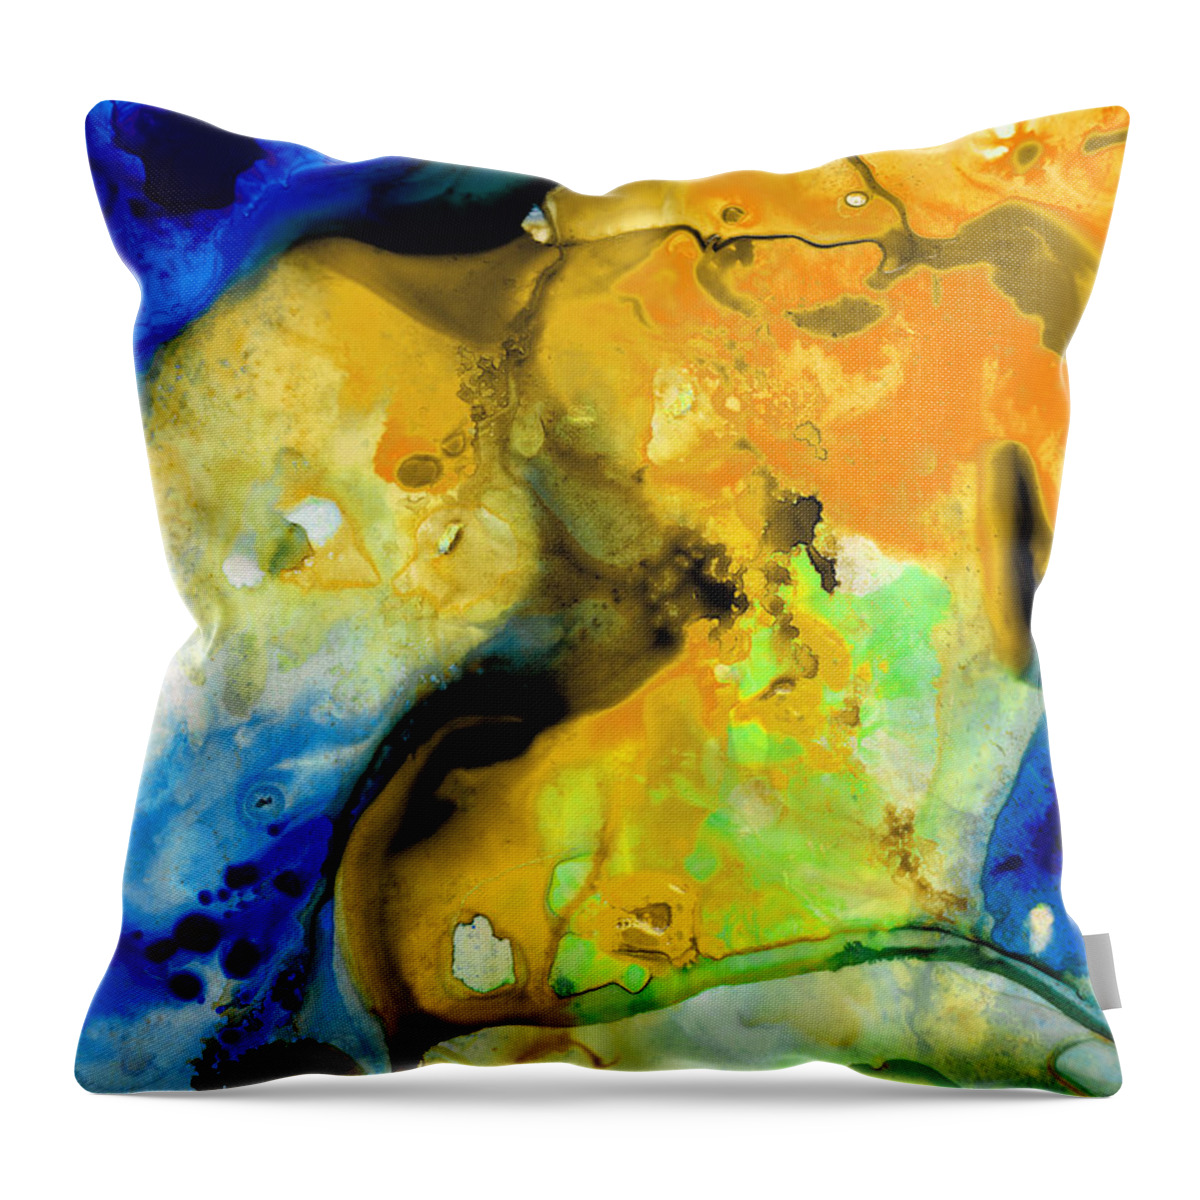 Abstract Throw Pillow featuring the painting Walking On Sunshine - Abstract Painting By Sharon Cummings by Sharon Cummings